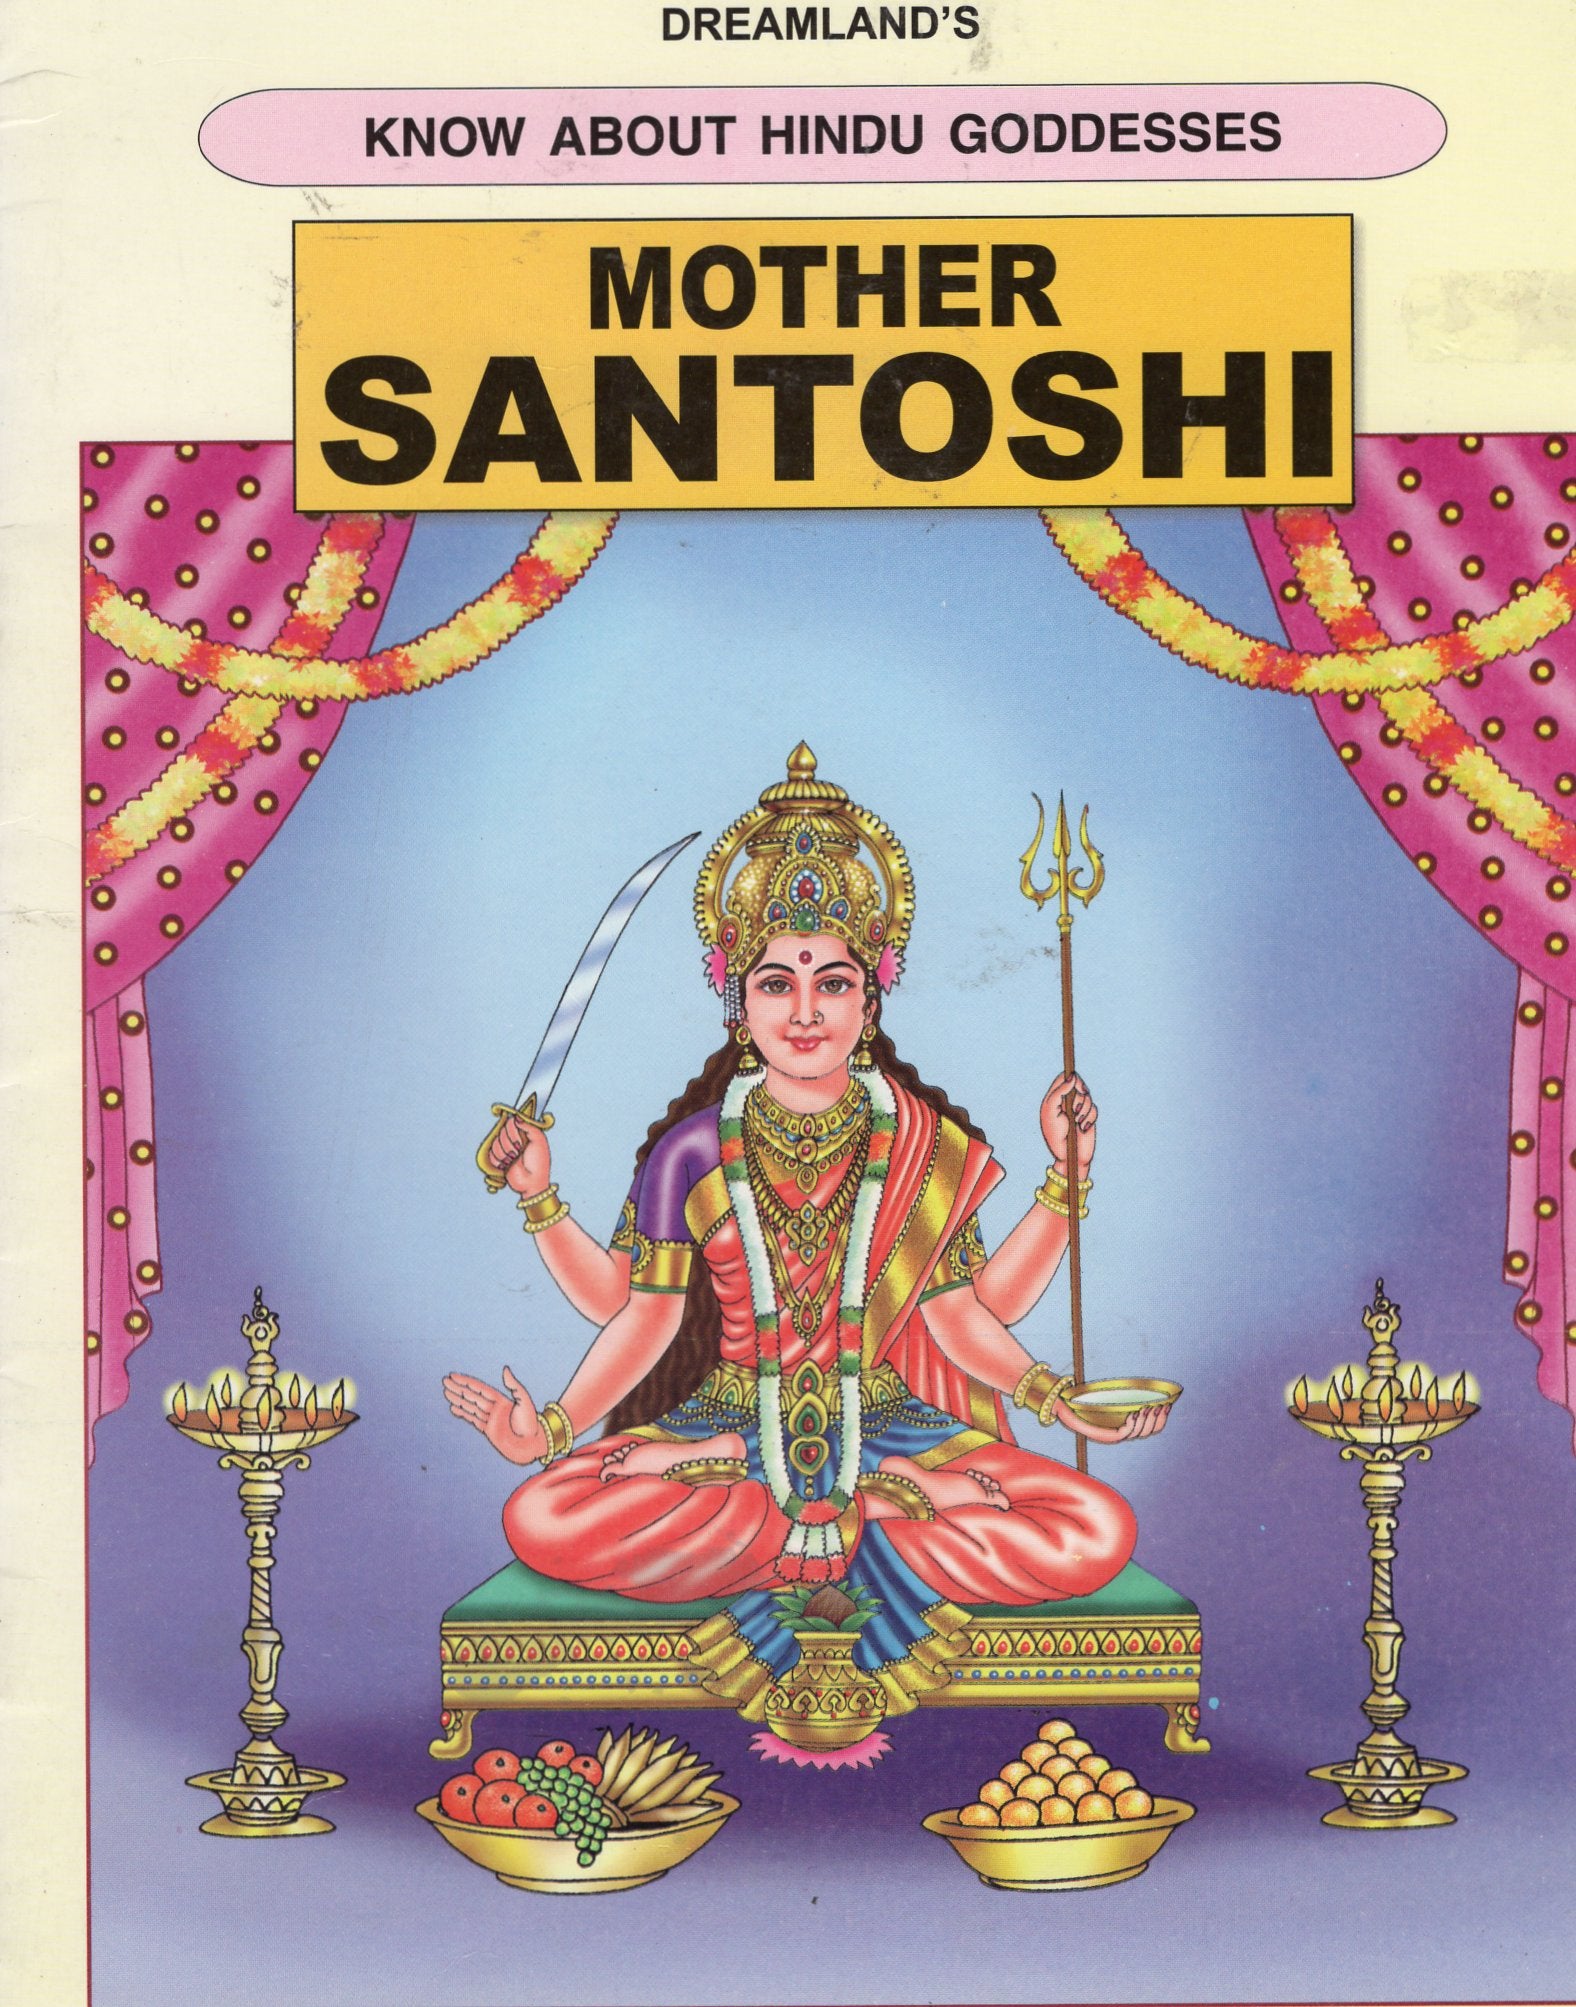 Mother Santoshi - Know About Hindu Goddesses